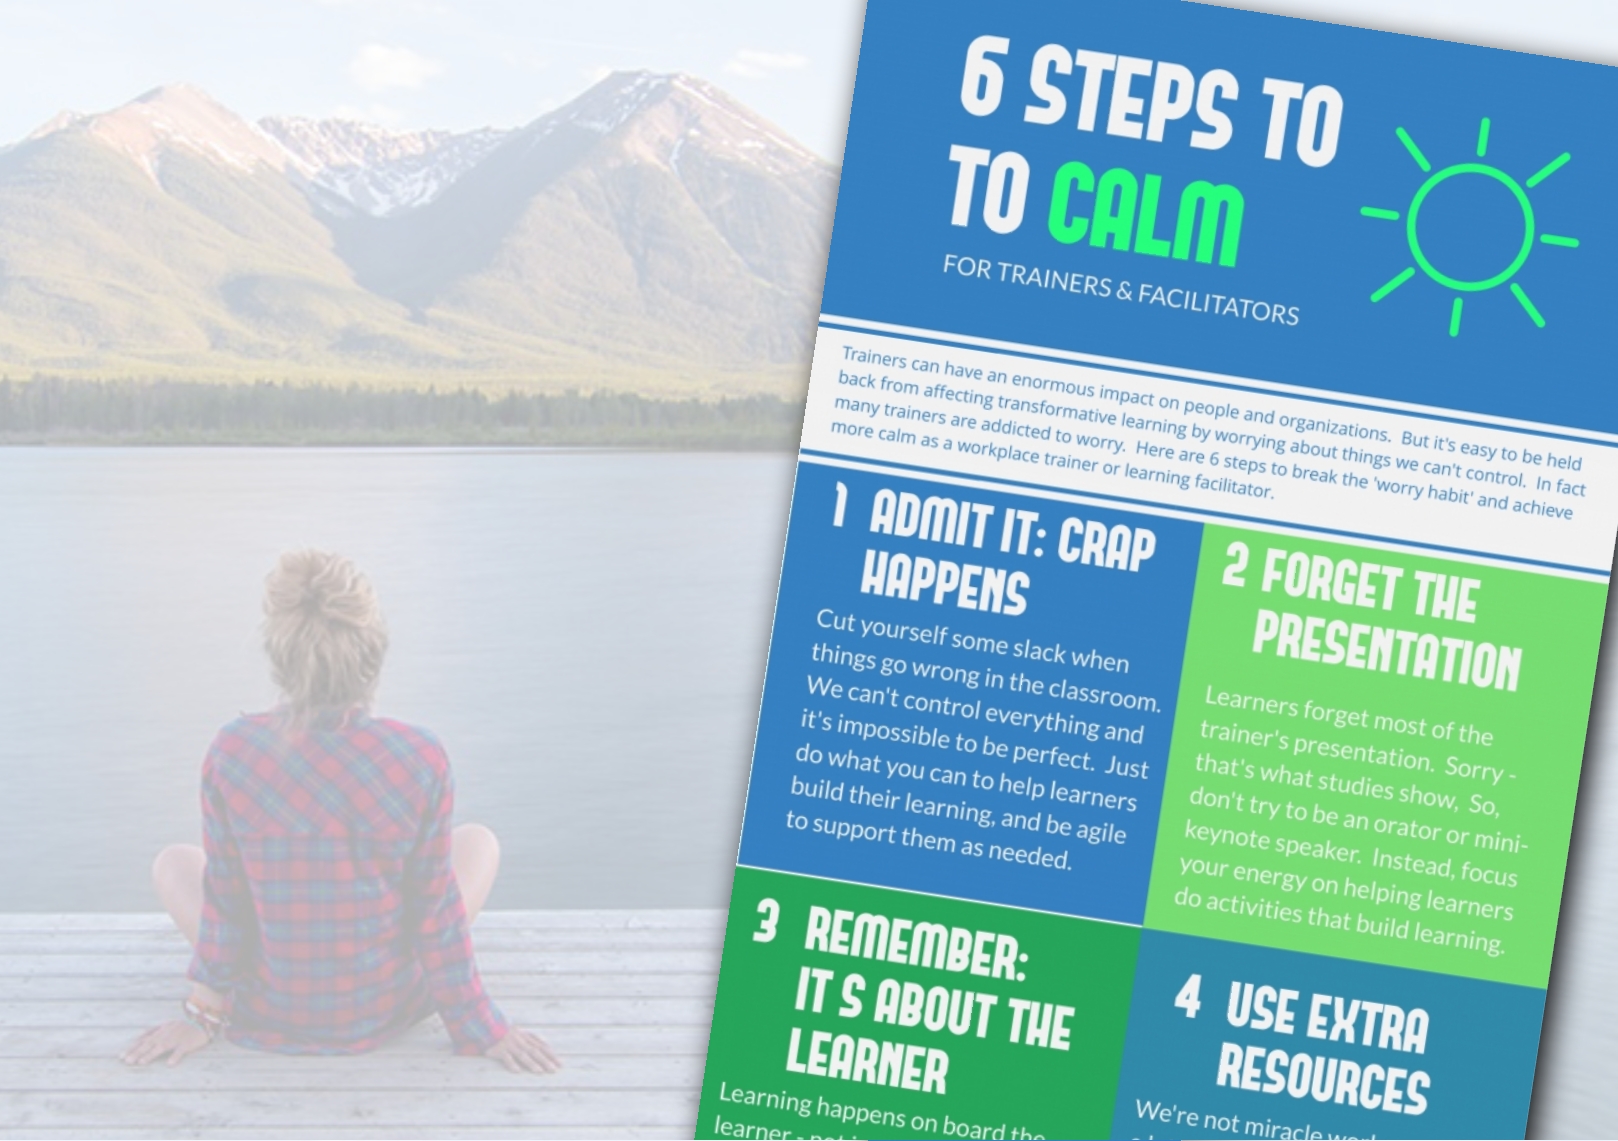 6 Steps to Calm for Trainers